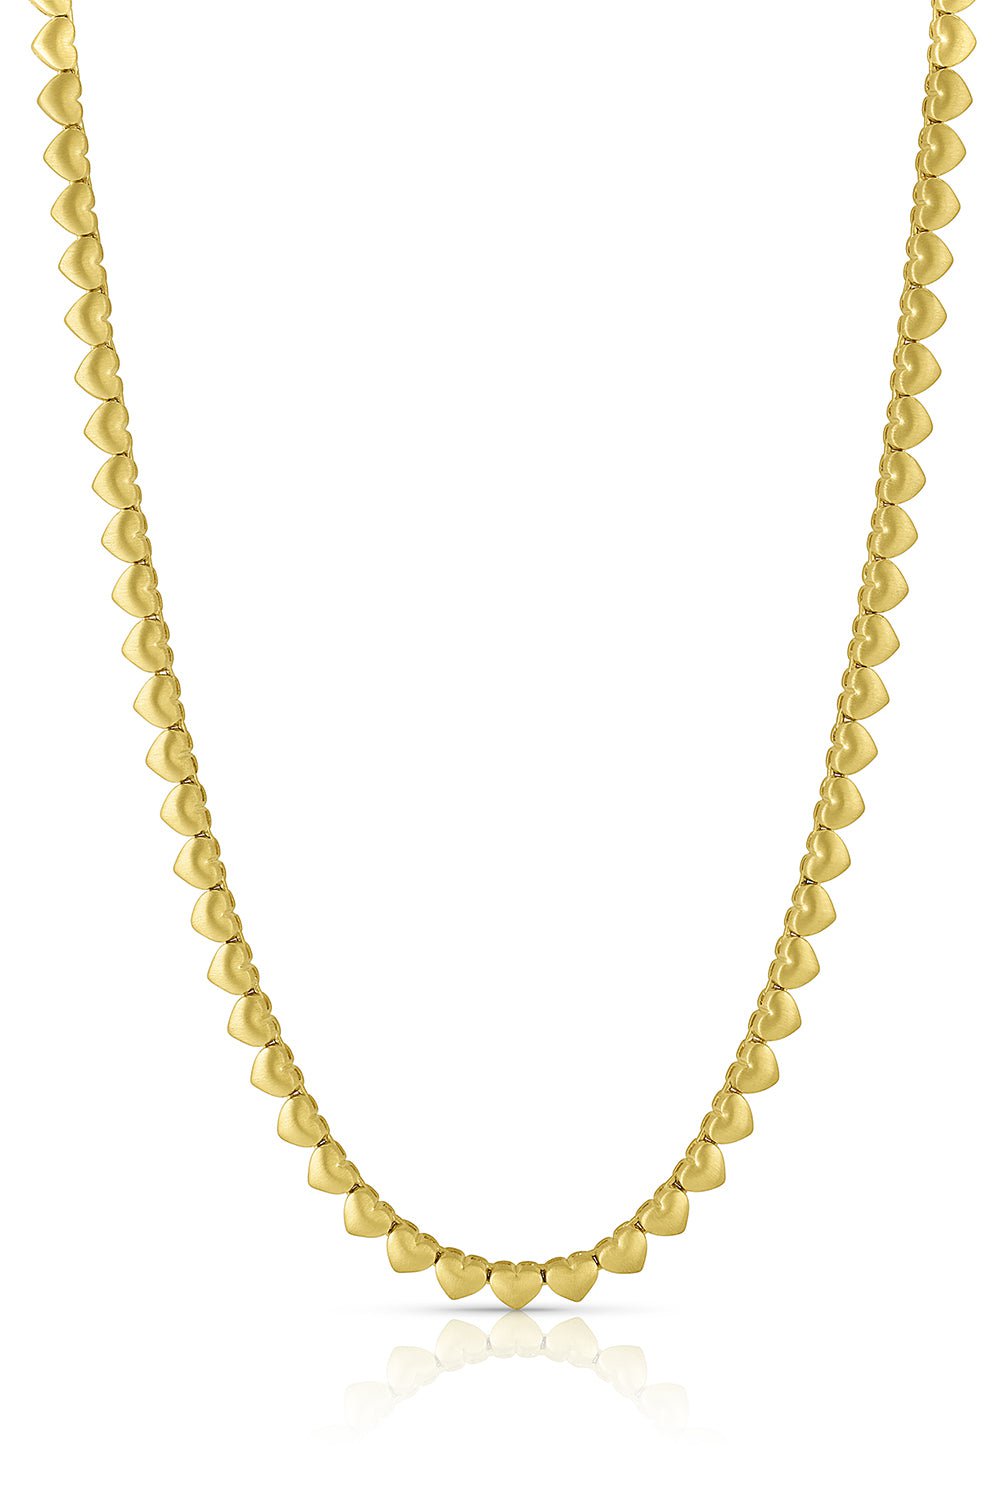 LEIGH MAXWELL-Solid Heart Tennis Necklace-YELLOW GOLD